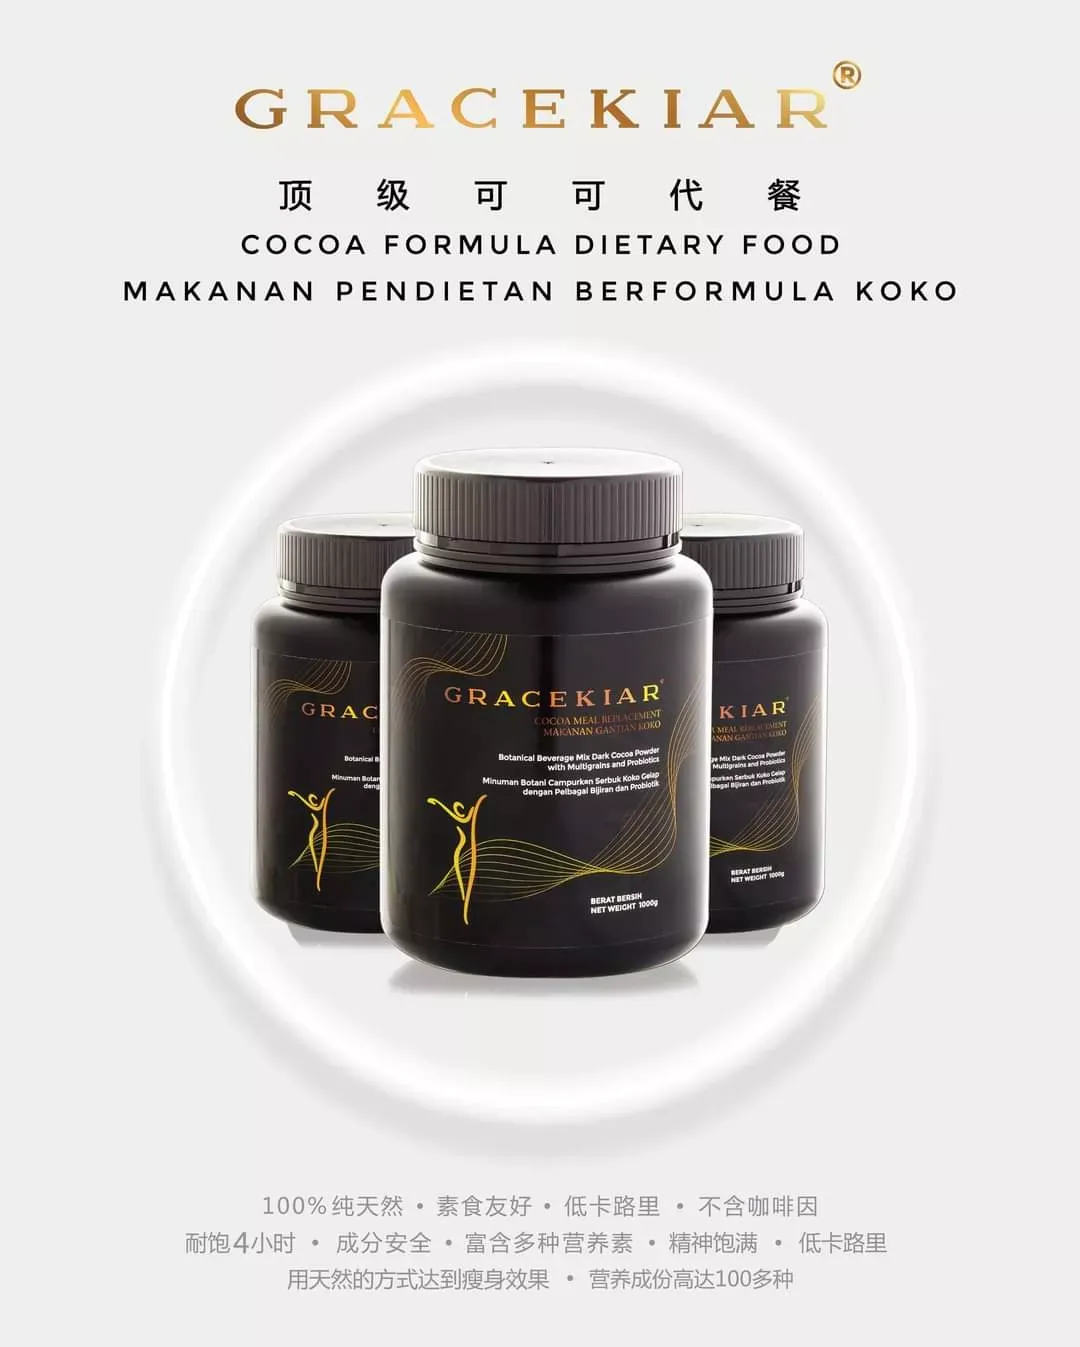 Pad buy RM400 free 2 bottles + 1 box cocoa replacement